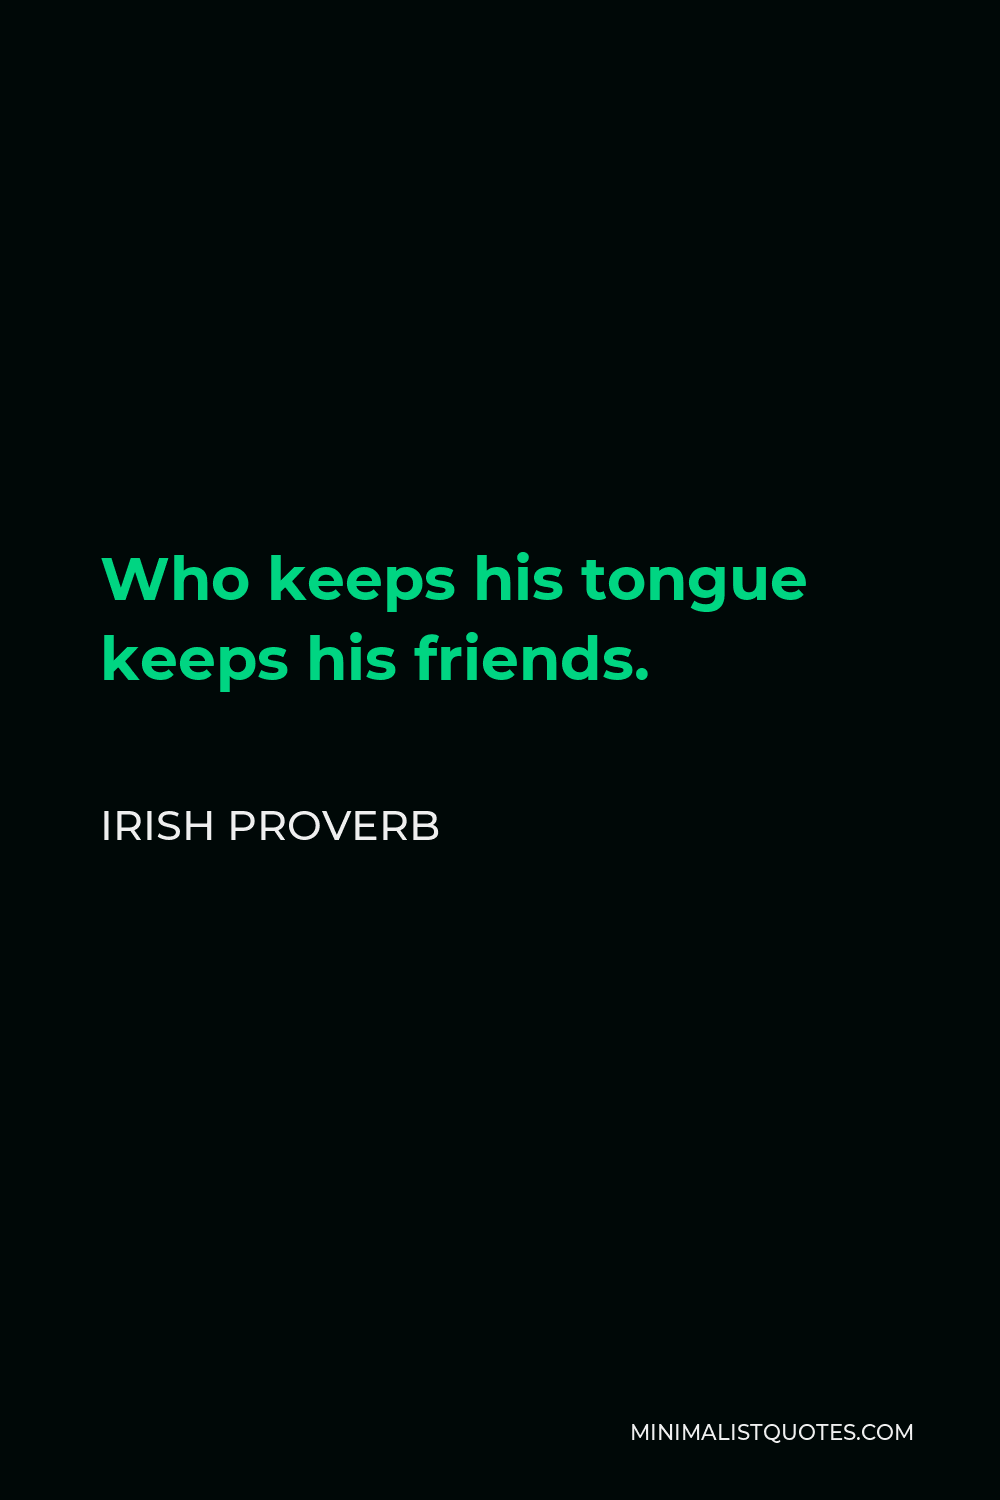 Irish Proverb Quote - Who keeps his tongue keeps his friends.